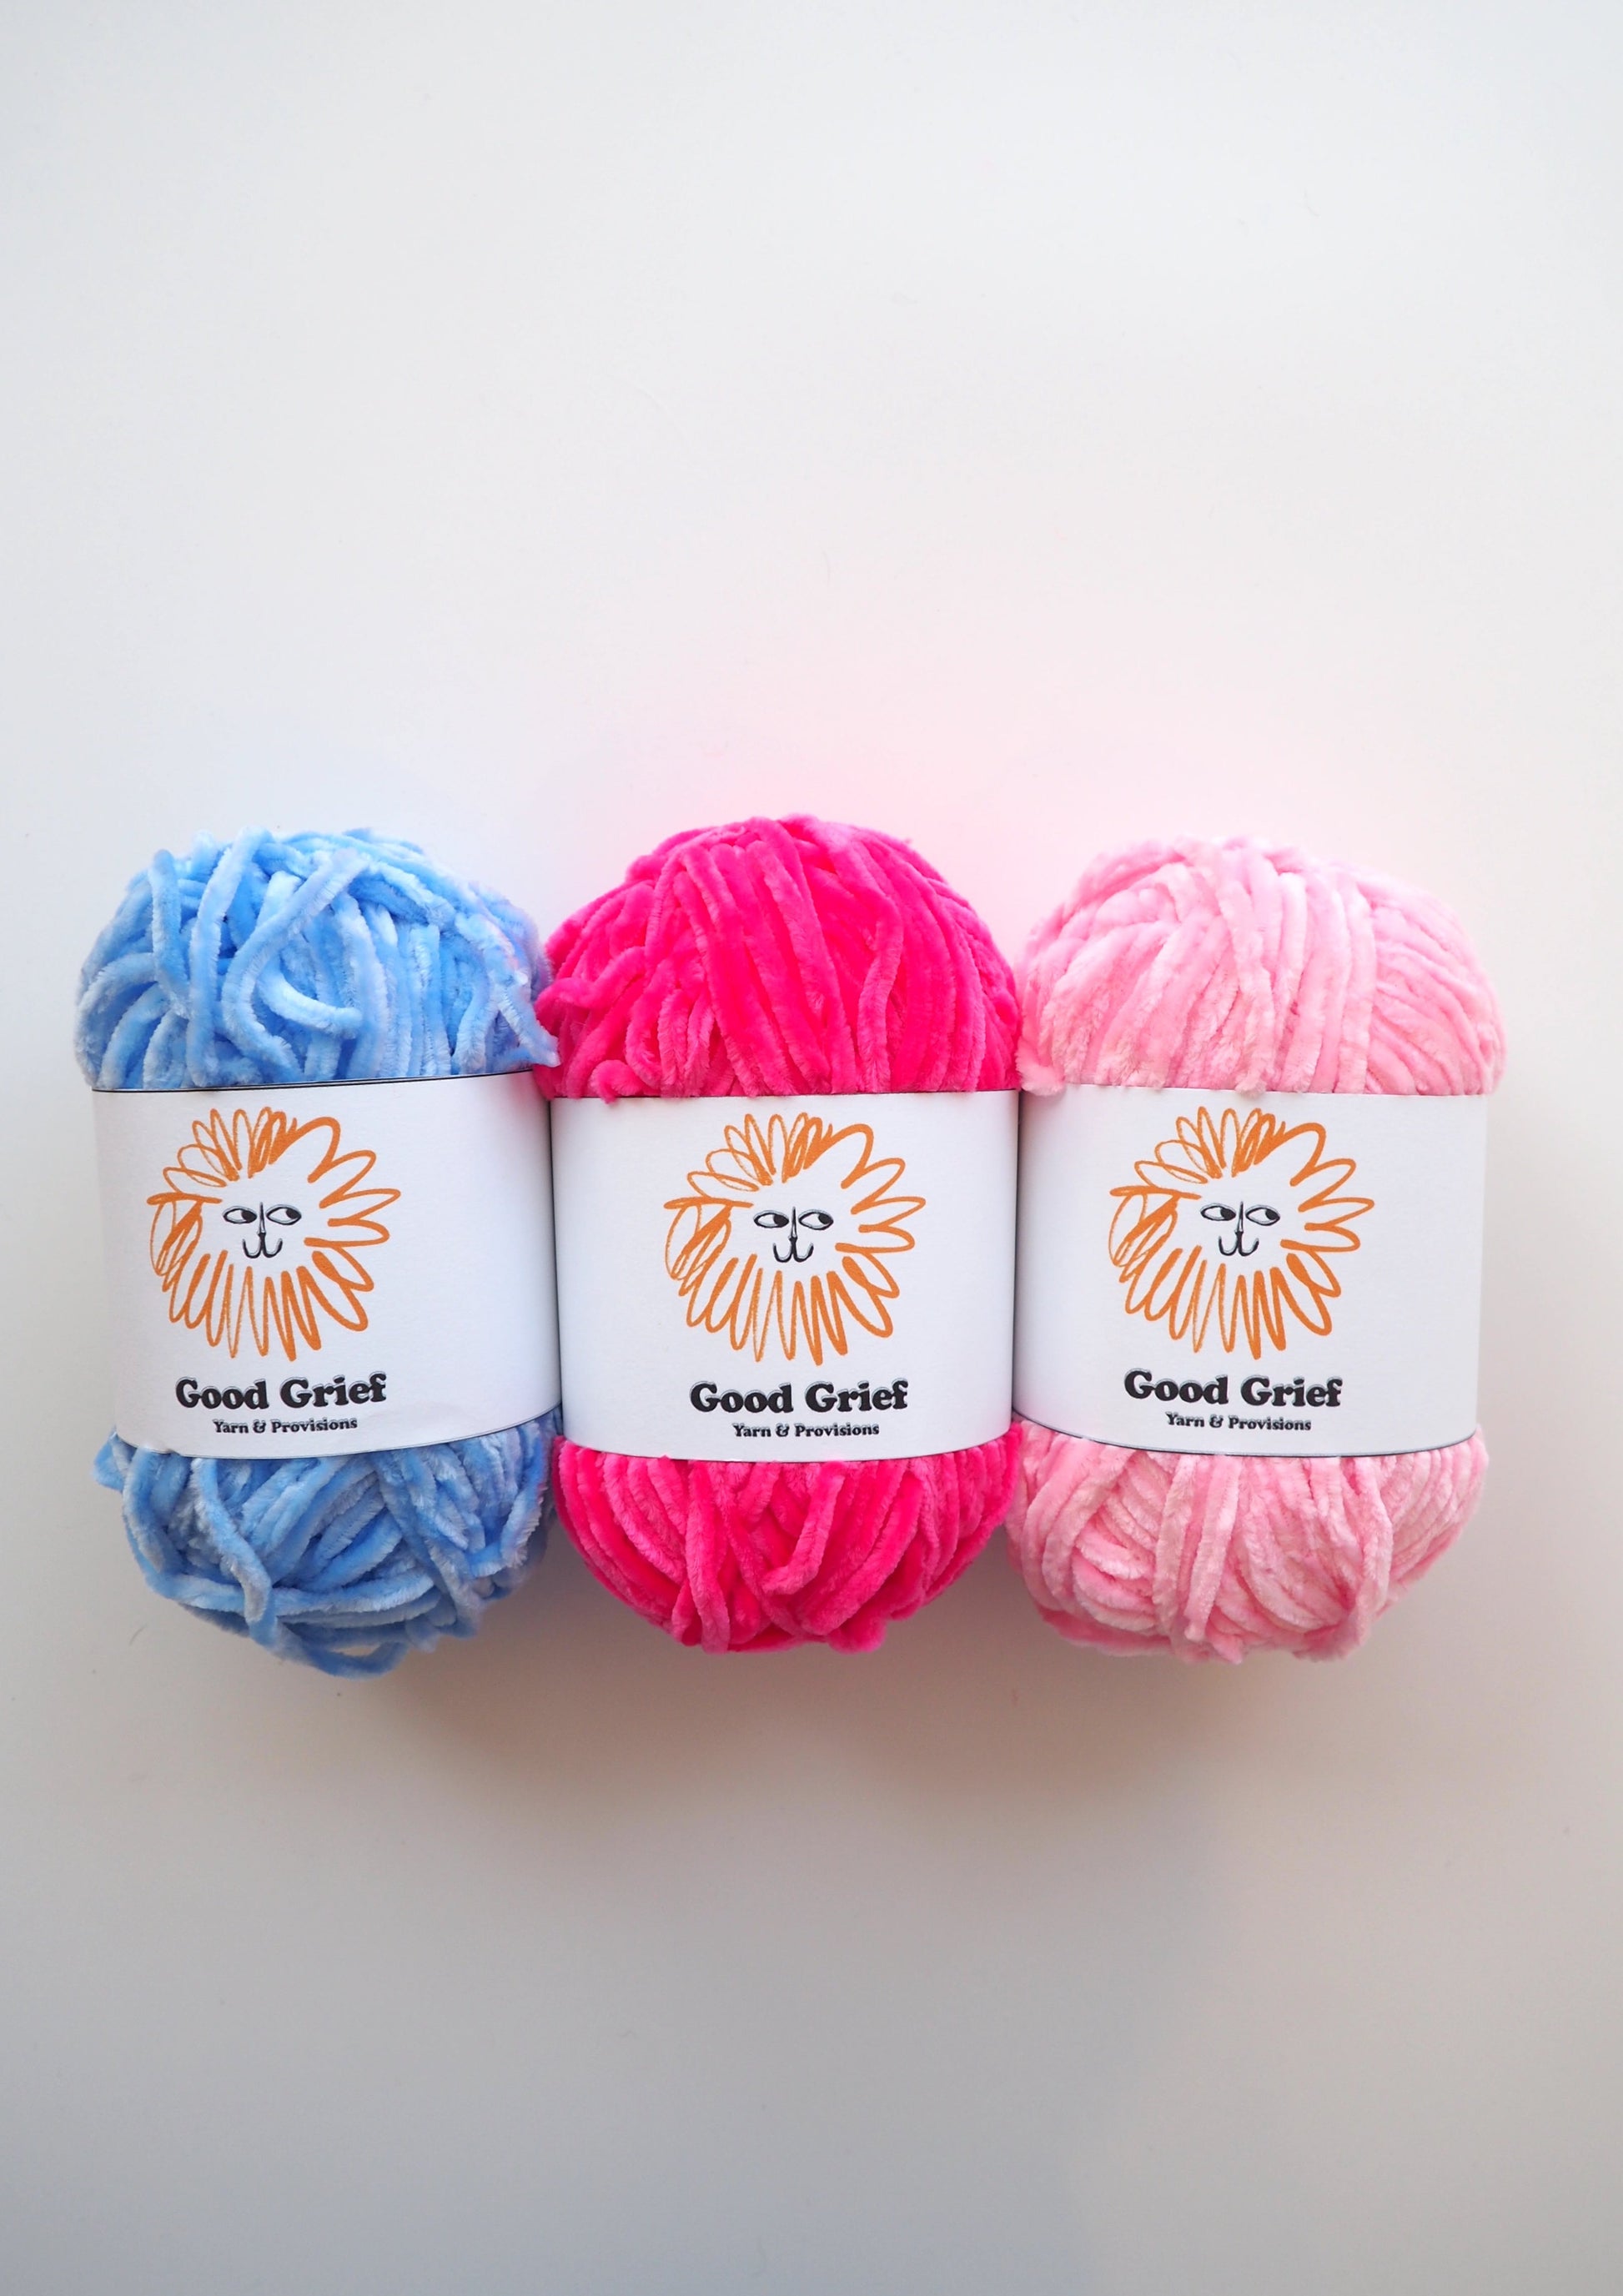 Chenille Chunky Yarn - Soft and Luxurious Texture in Baby Blue, Bright Pink, and Baby Pink Color Variants